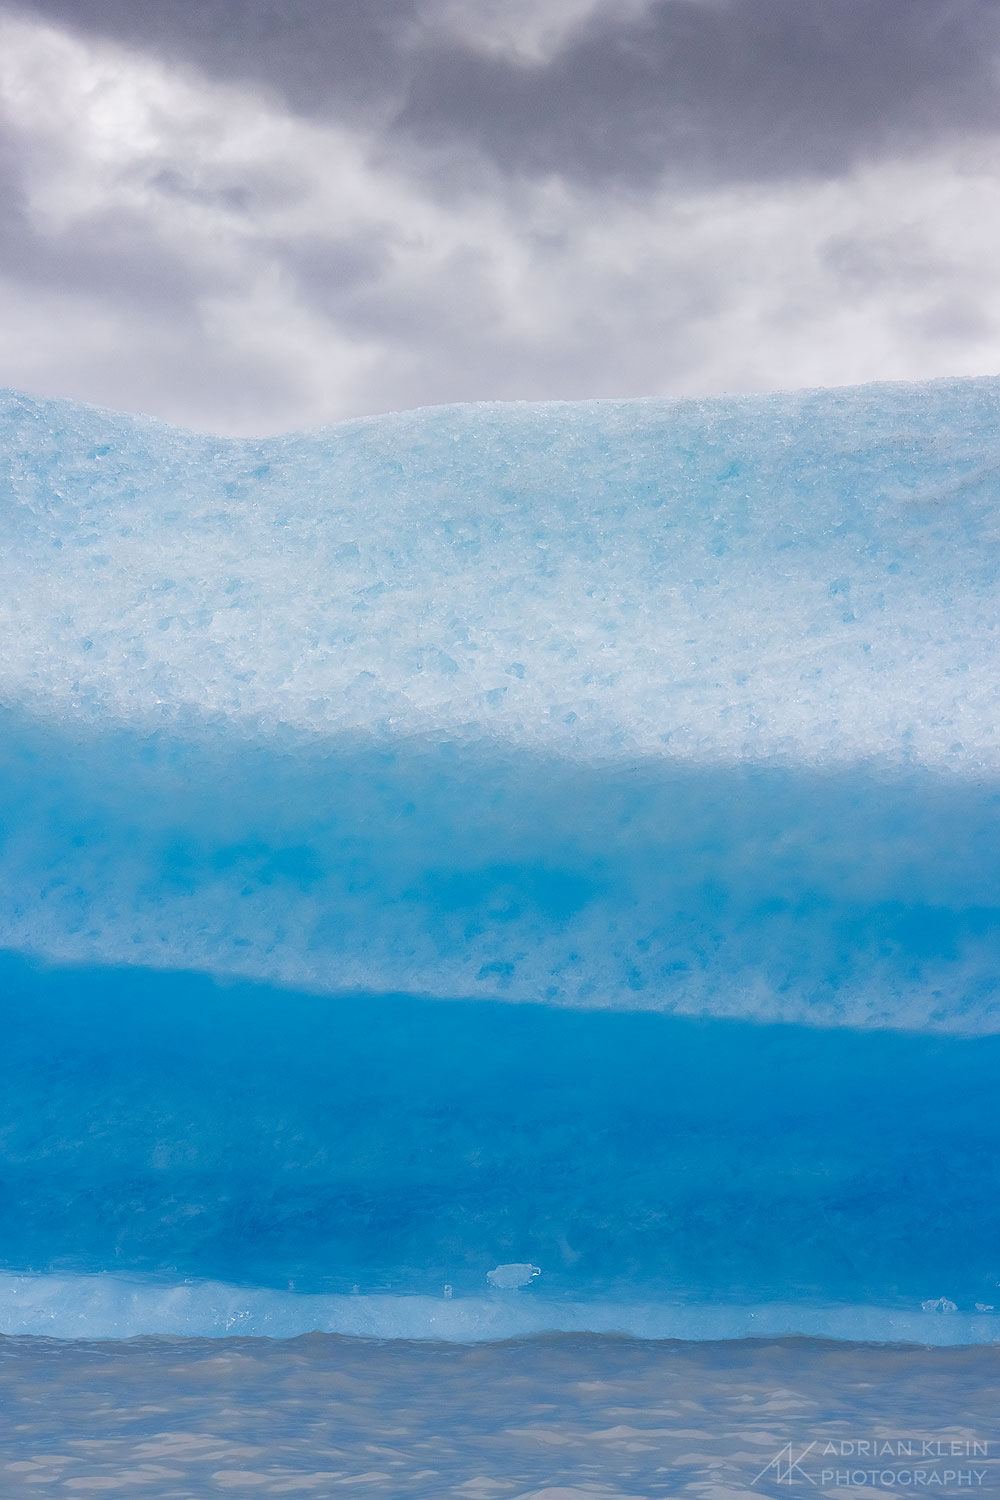 Abstracted view of larger iceberg in Alaska.